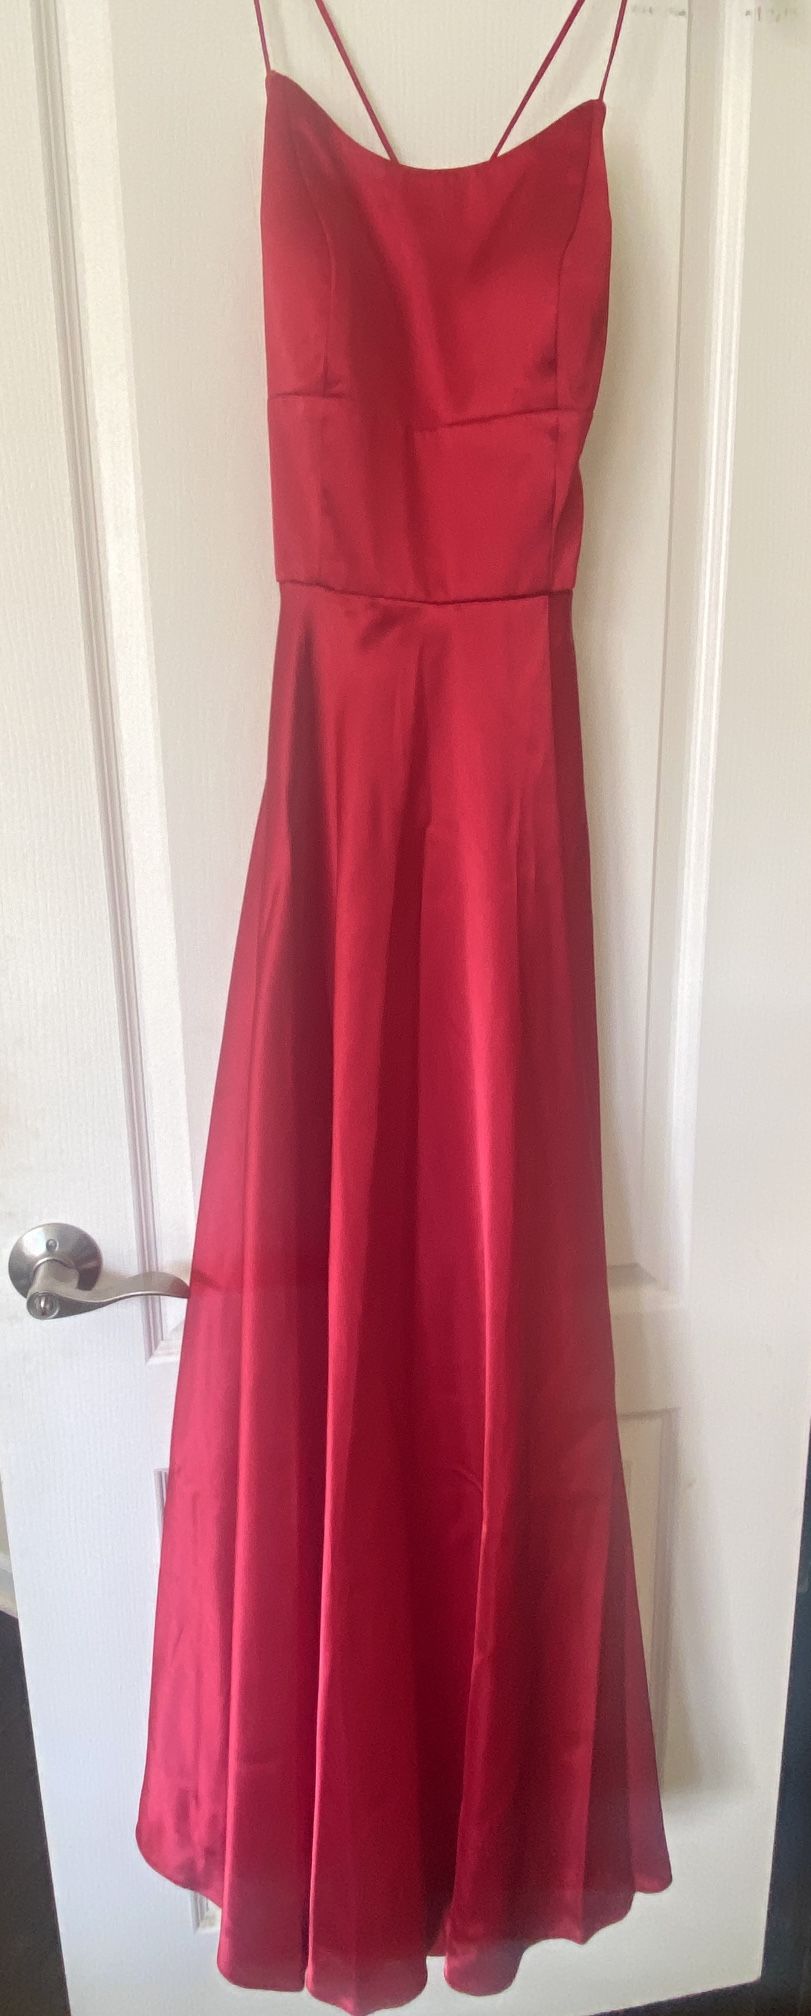 Betsy & Adam Red Satin Backless  Dress Size 0